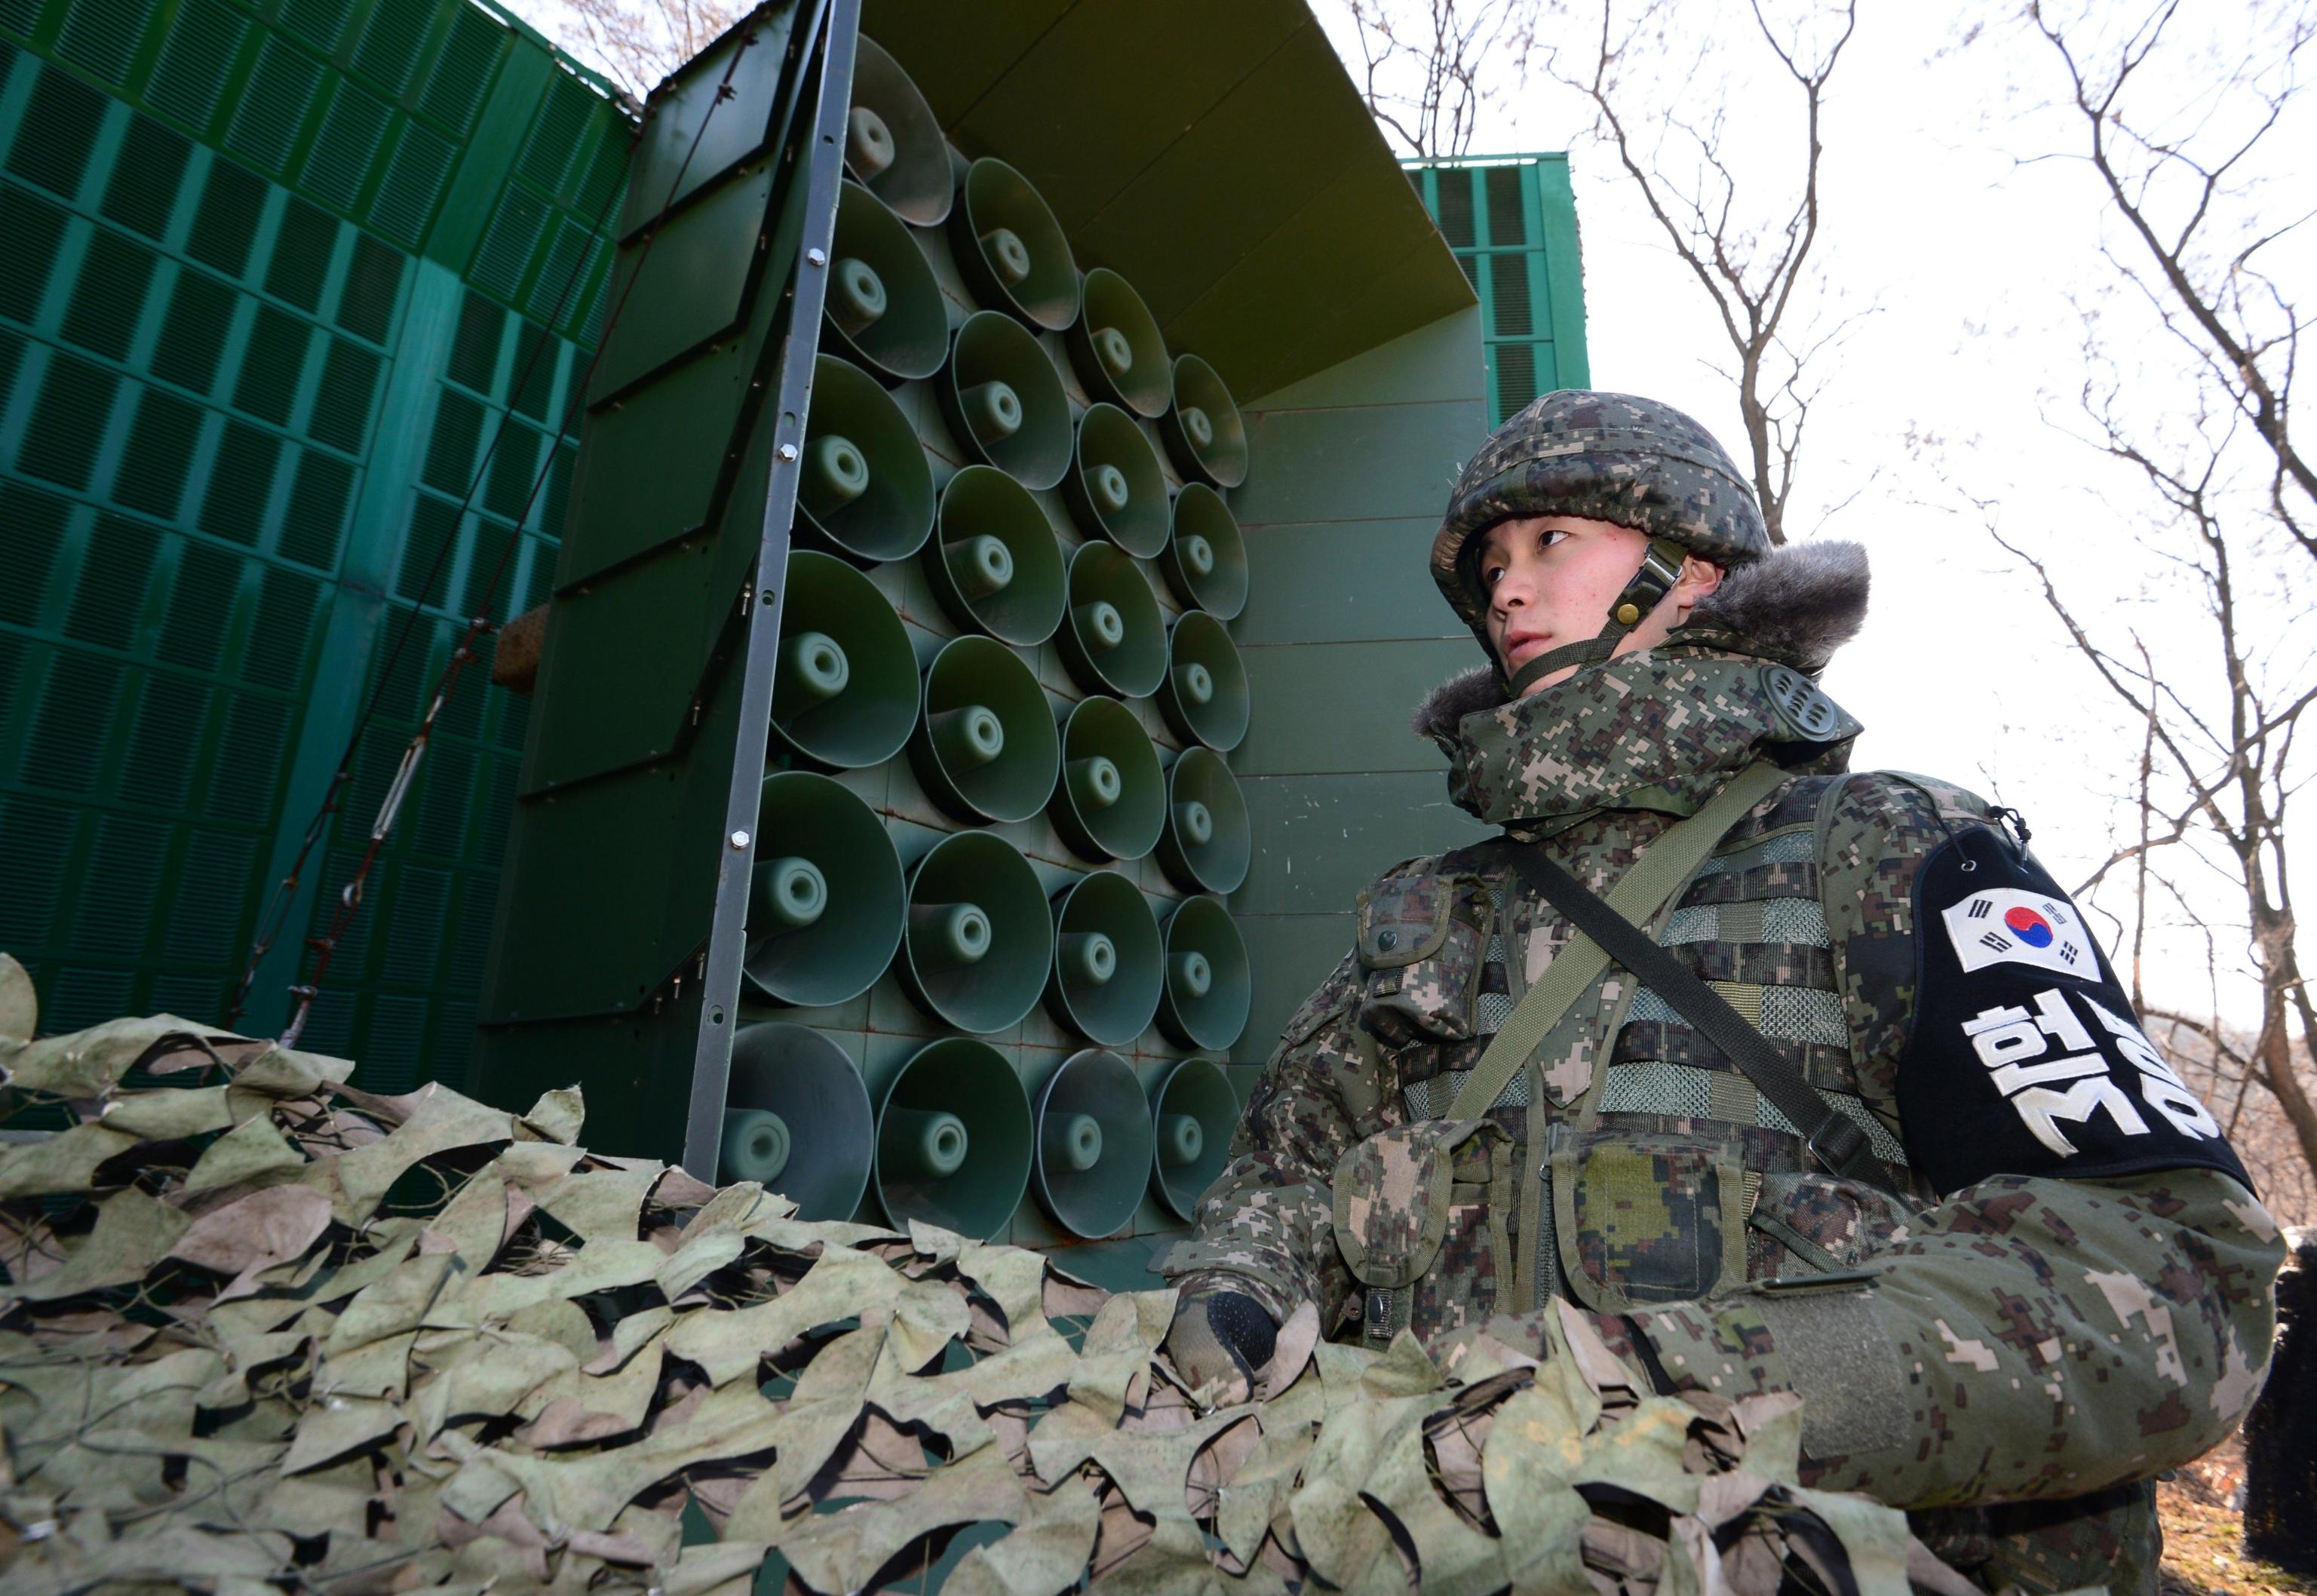 epaselect epa05795966 An undated photo made available on 16 February 2017 shows a South Korean soldier standing near loudspeakers at the border with North Korea, at an undisclosed location in South Korea. South Korea said on 15 February 2017, it will use loudspeakers along the inter-Korean border to inform North Koreans of the murder of North Korean leader Kim Jong-un's half-brother Kim Jong-nam. Kim Jong-nam was reportedly killed by two women at an airport in Kuala Lumpur, Malaysia, on 13 February 2017. EPA/YONHAP SOUTH KOREA OUT